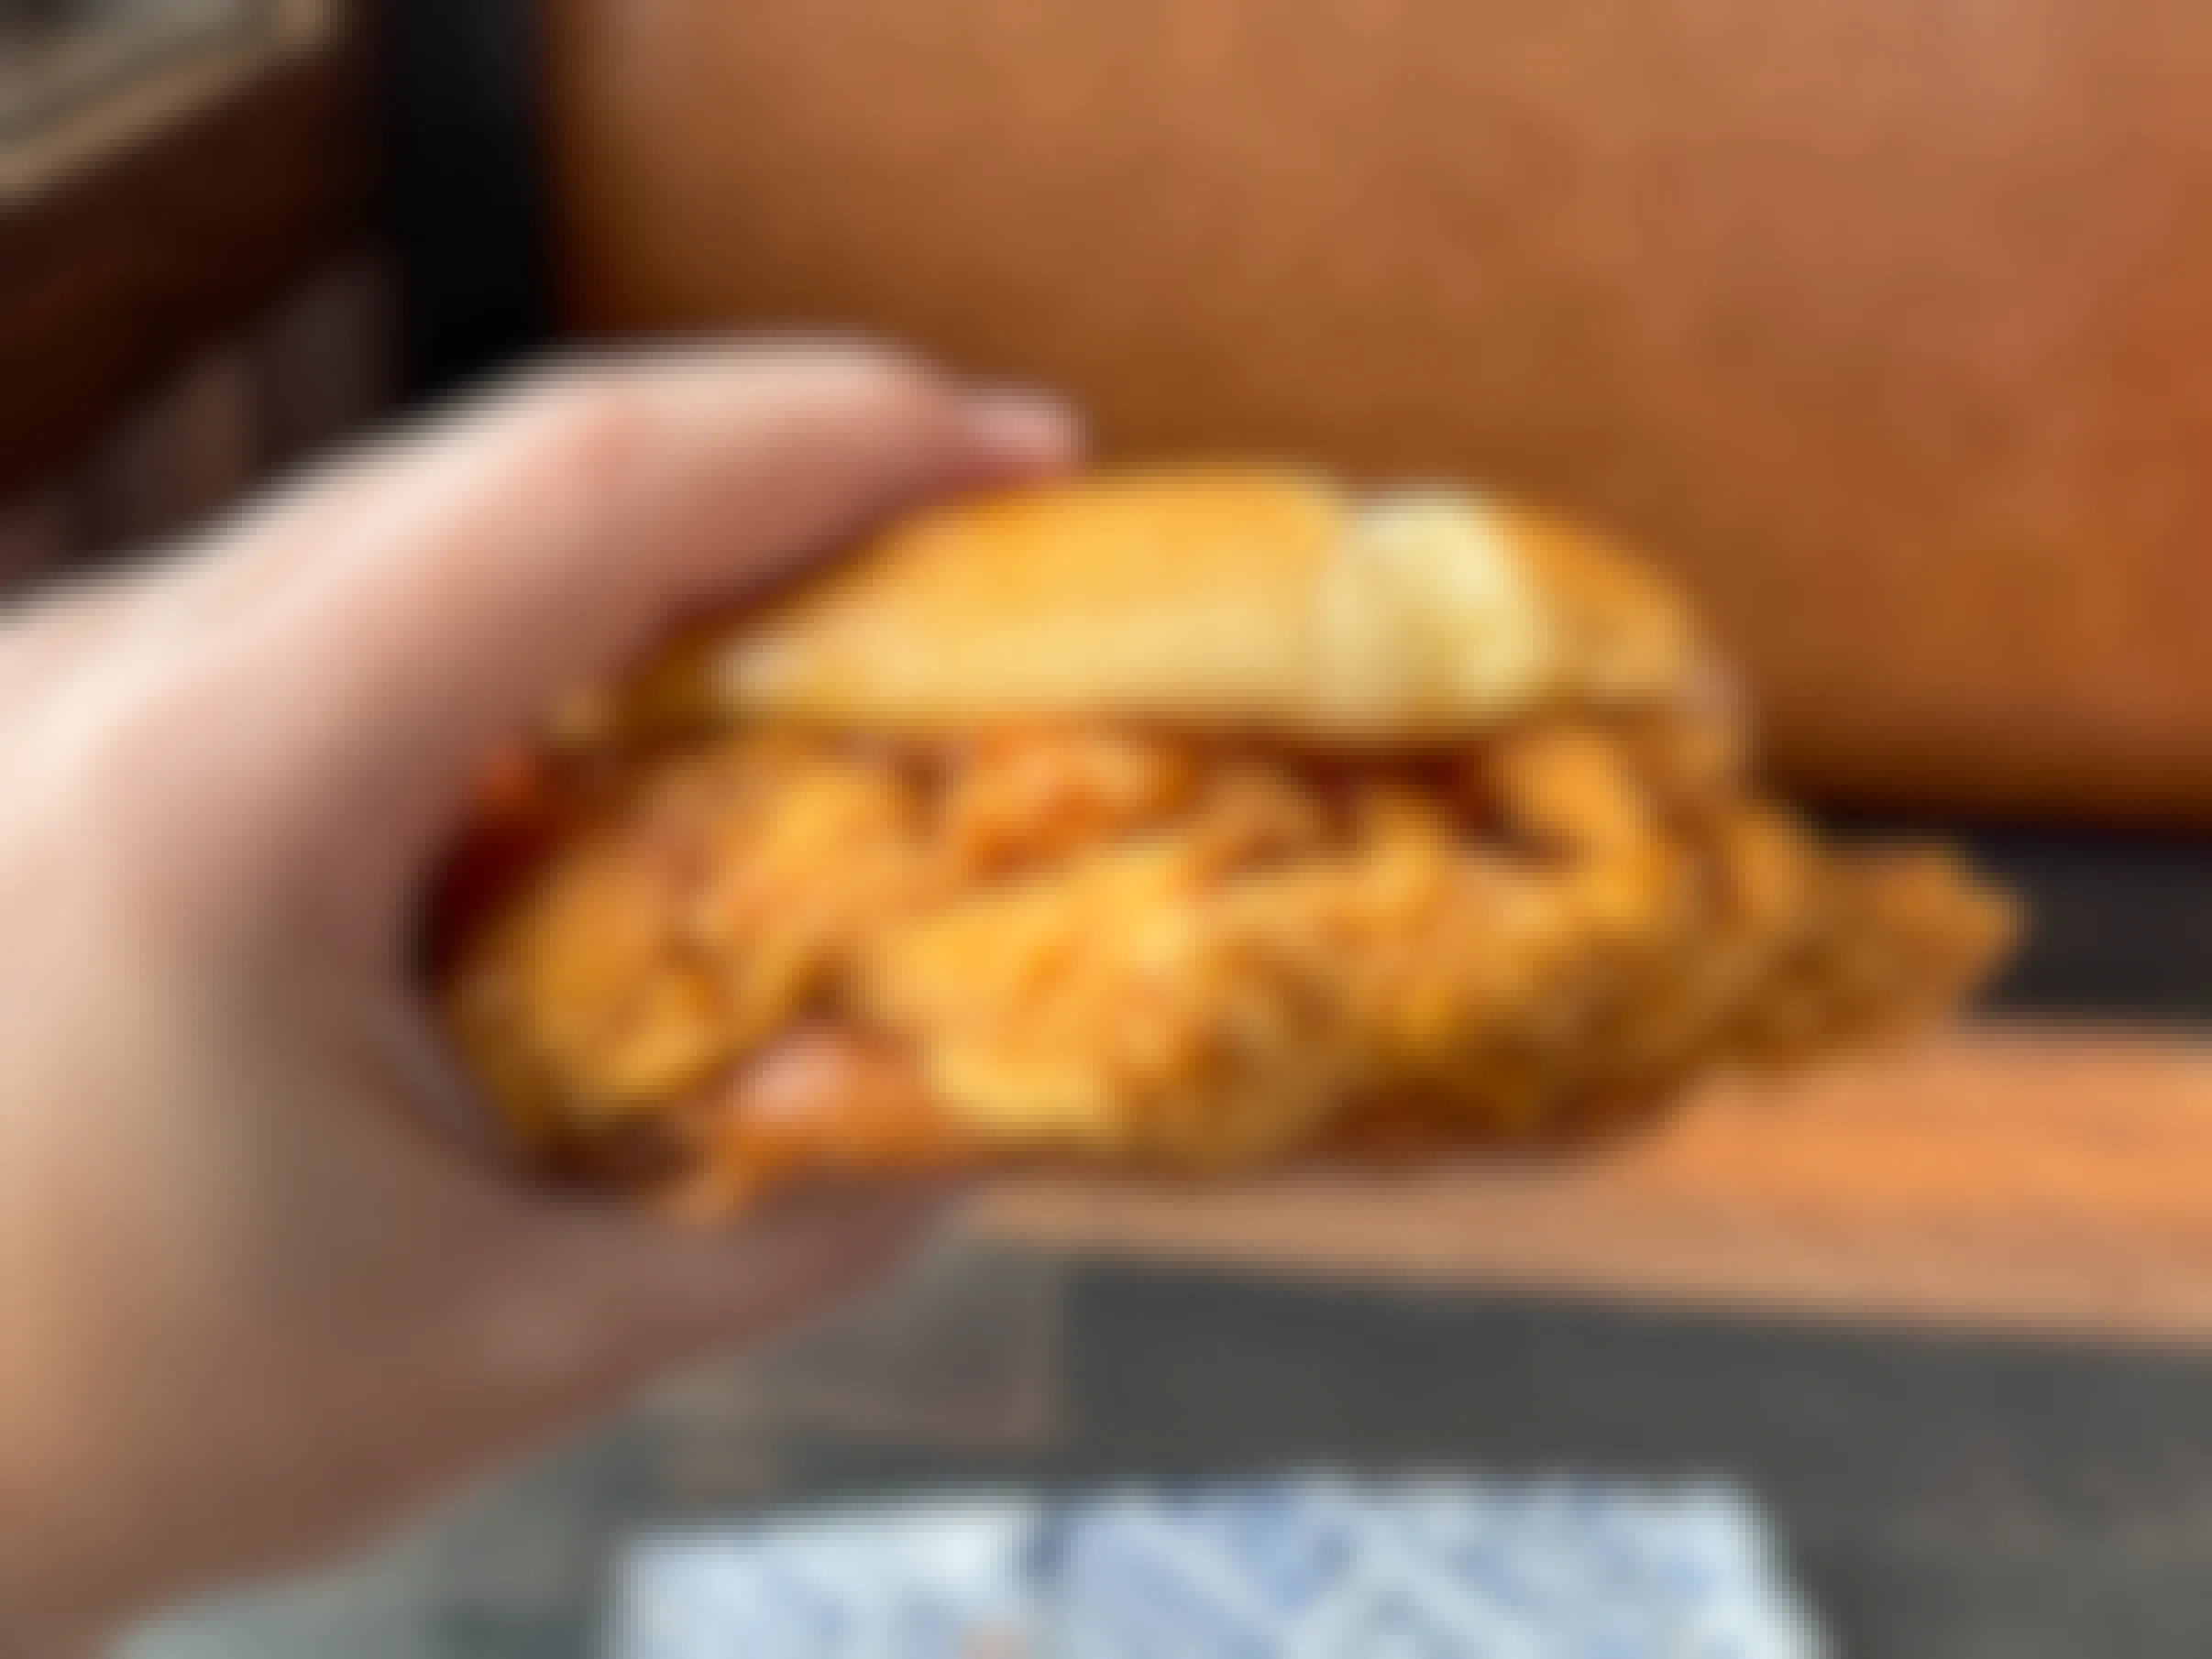 A person's hand holding up a chicken sandwich from Zaxby's restaurant.